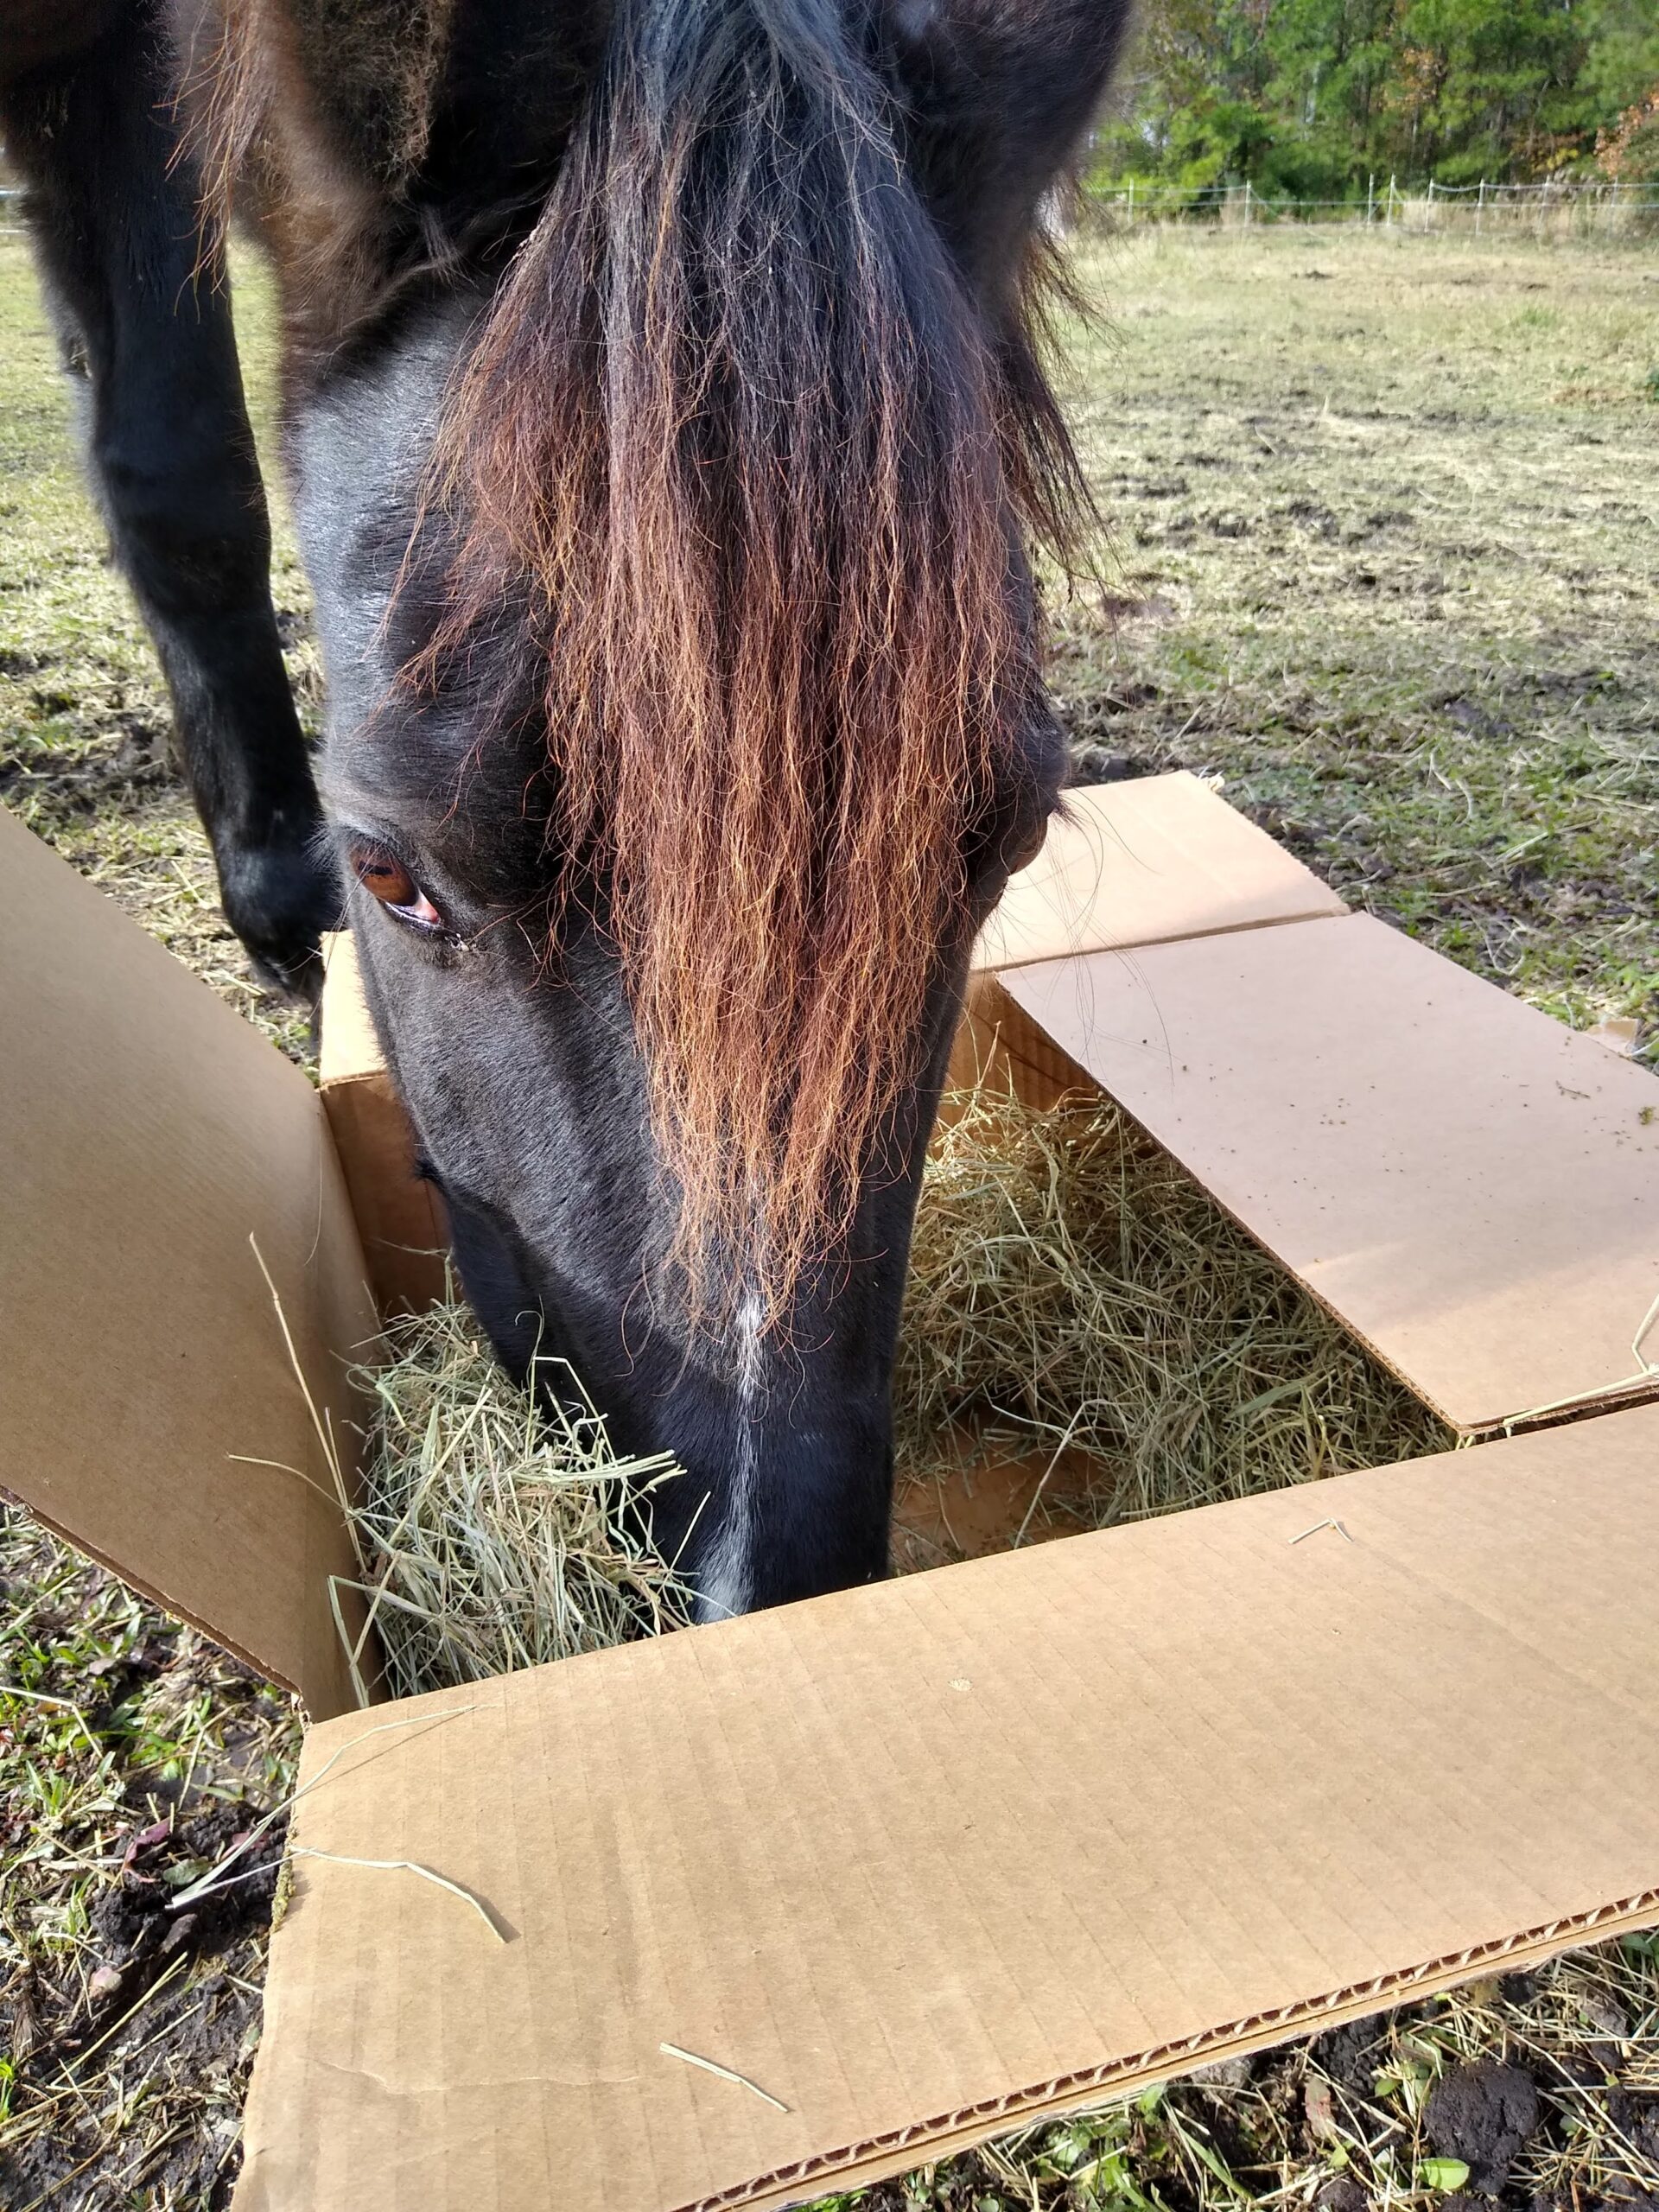 A forage box for horses with a black horse eating treats inside the box.